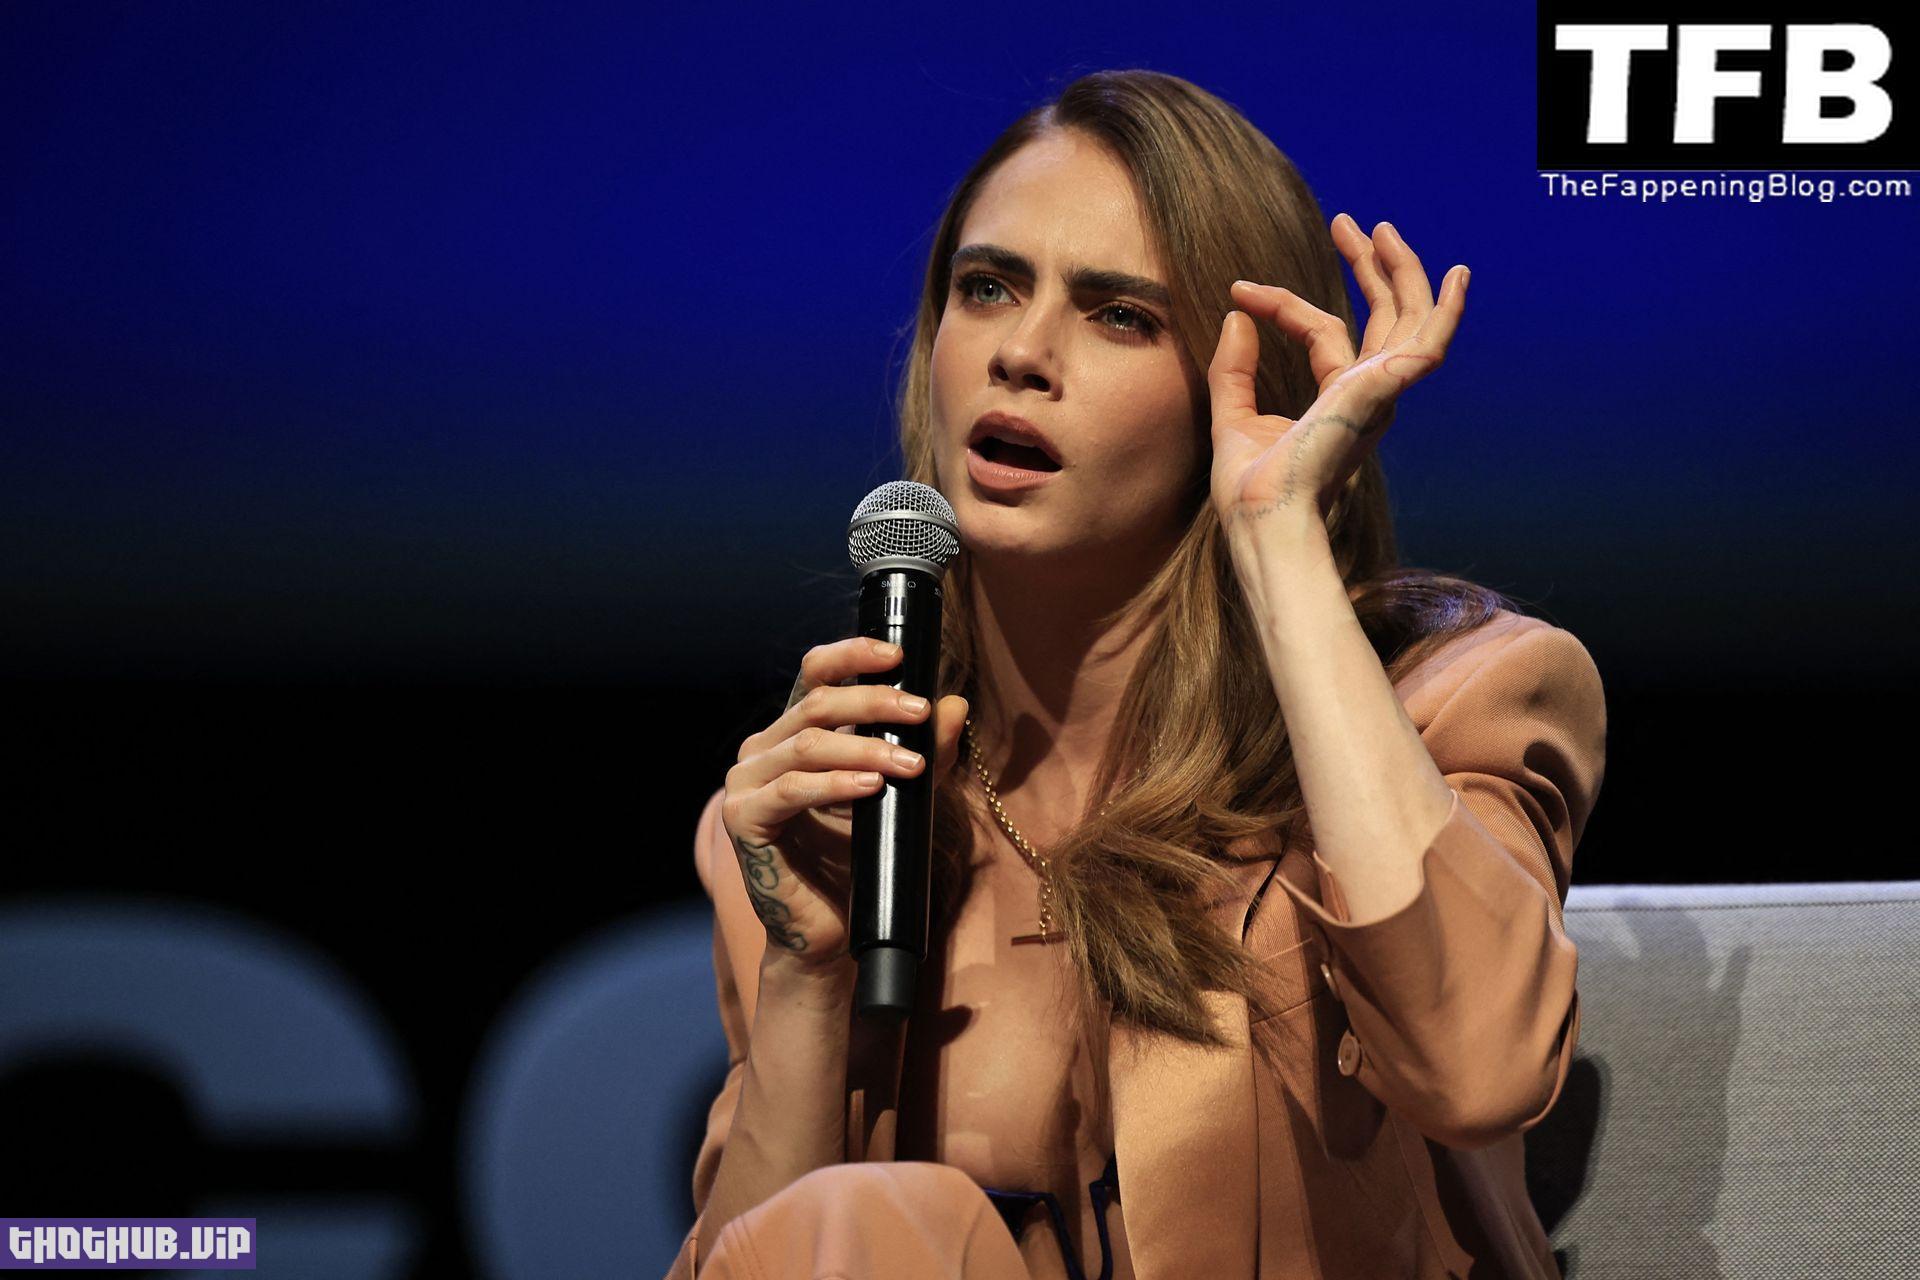 Cara Delevingne Sexy The Fappening Blog 6 2